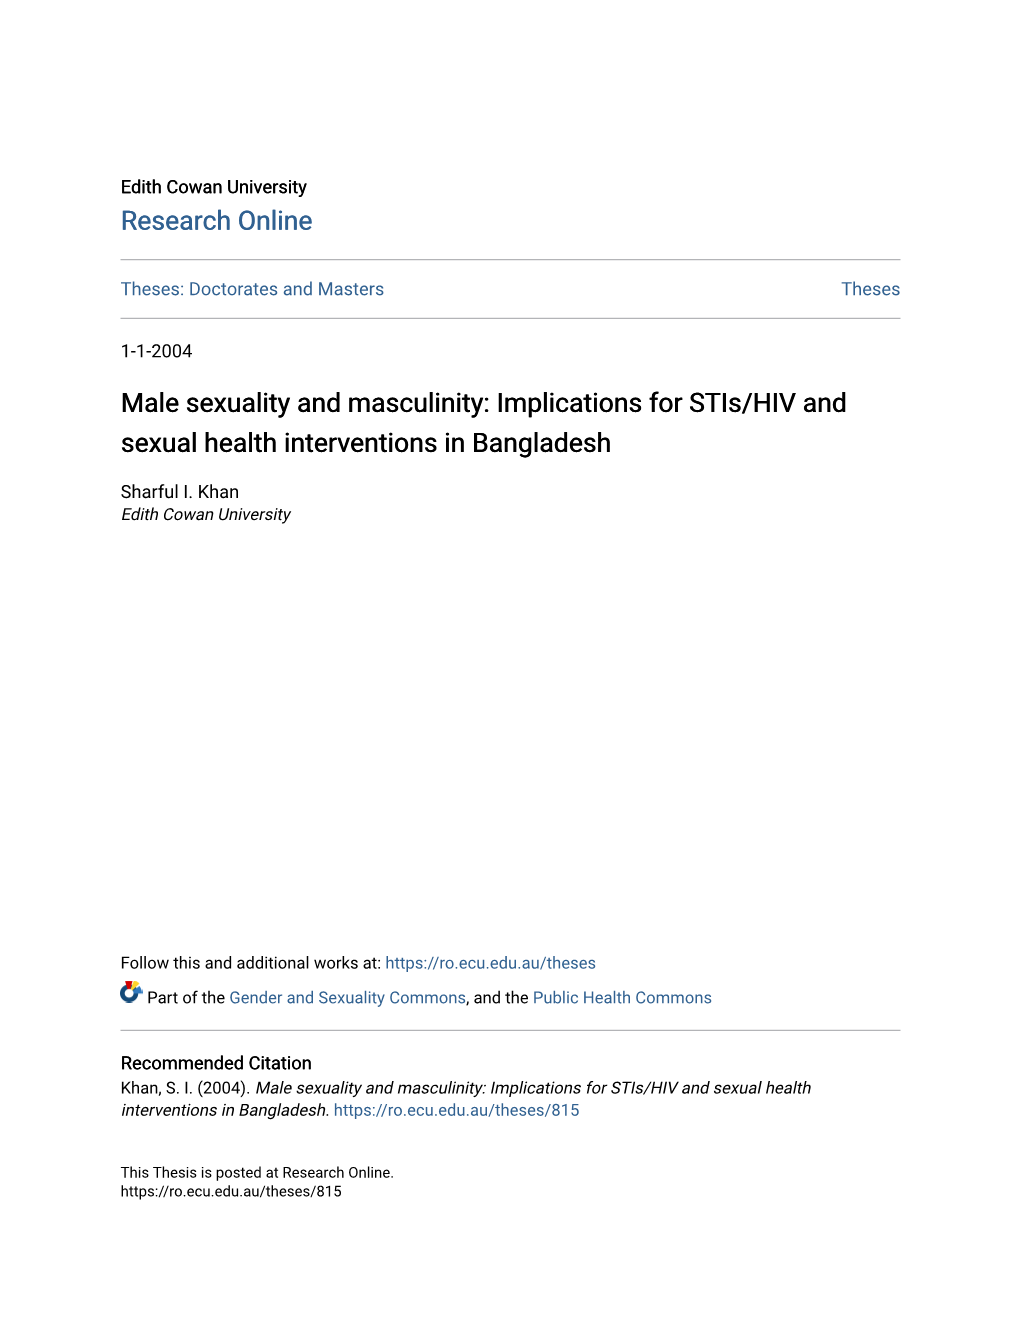 Male Sexuality and Masculinity: Implications for Stis/HIV and Sexual Health Interventions in Bangladesh